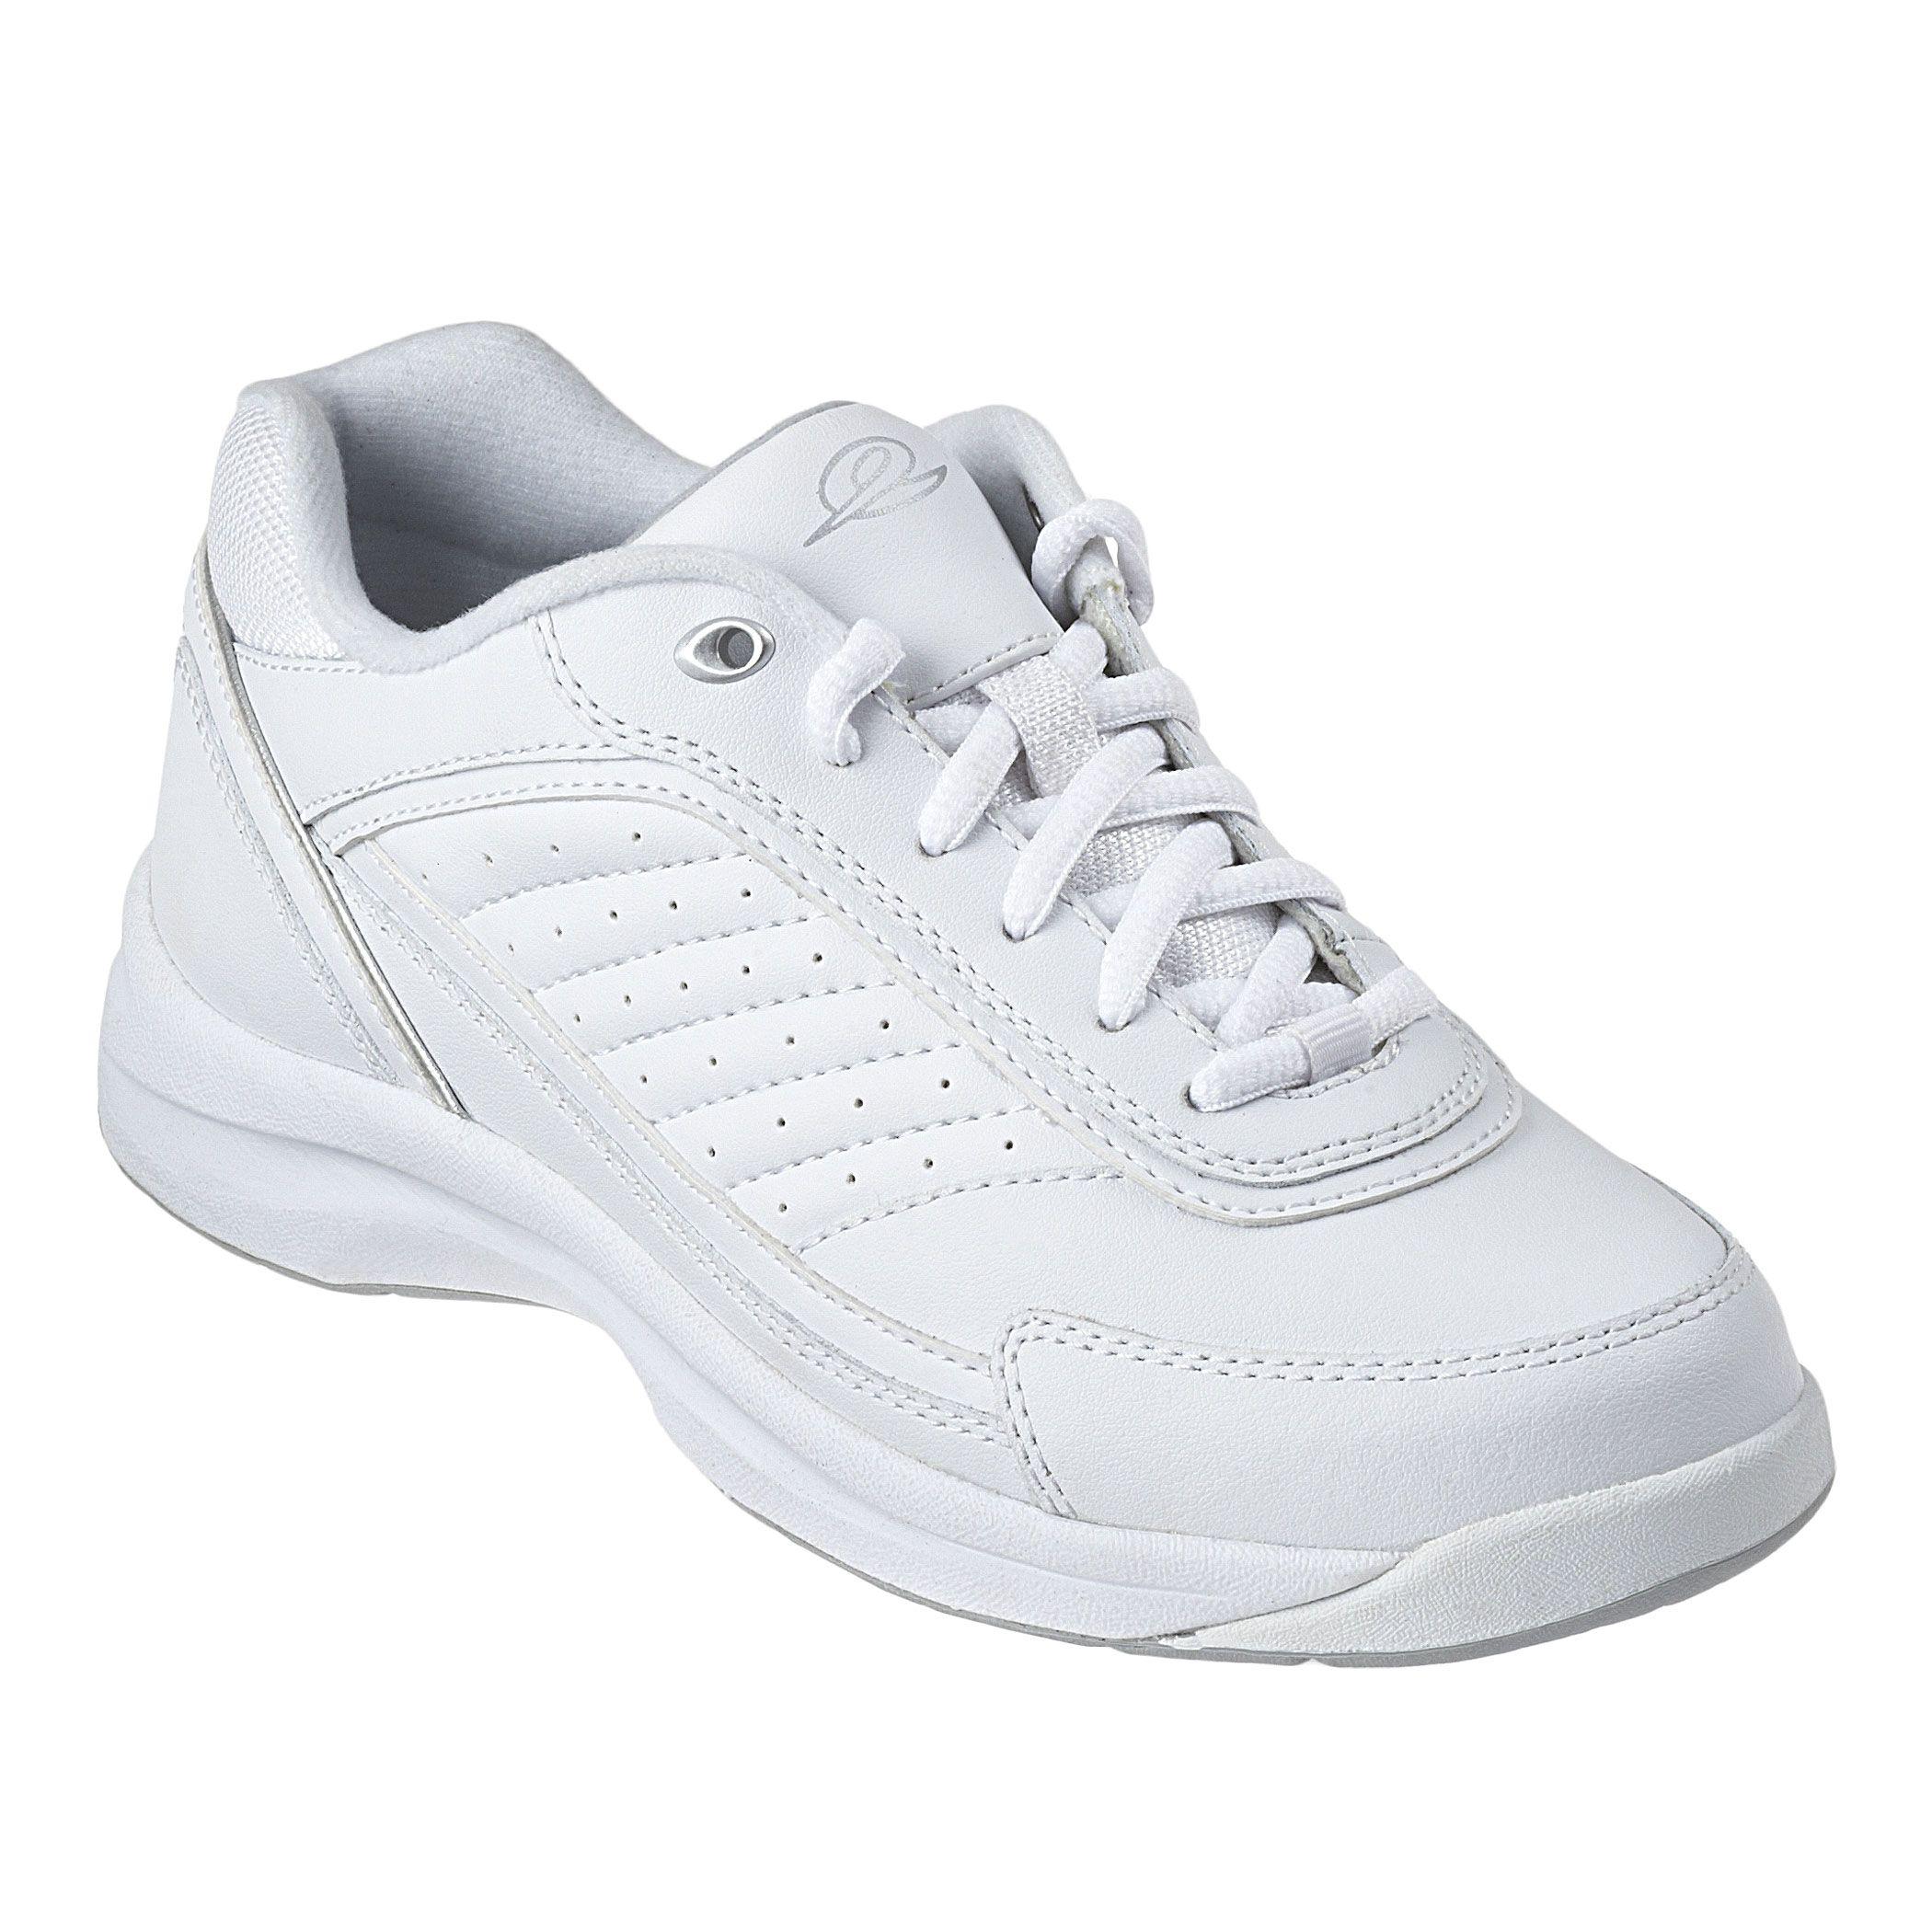 Easy Spirit Soar Leather Walking Shoes in White Leather (White) - Lyst